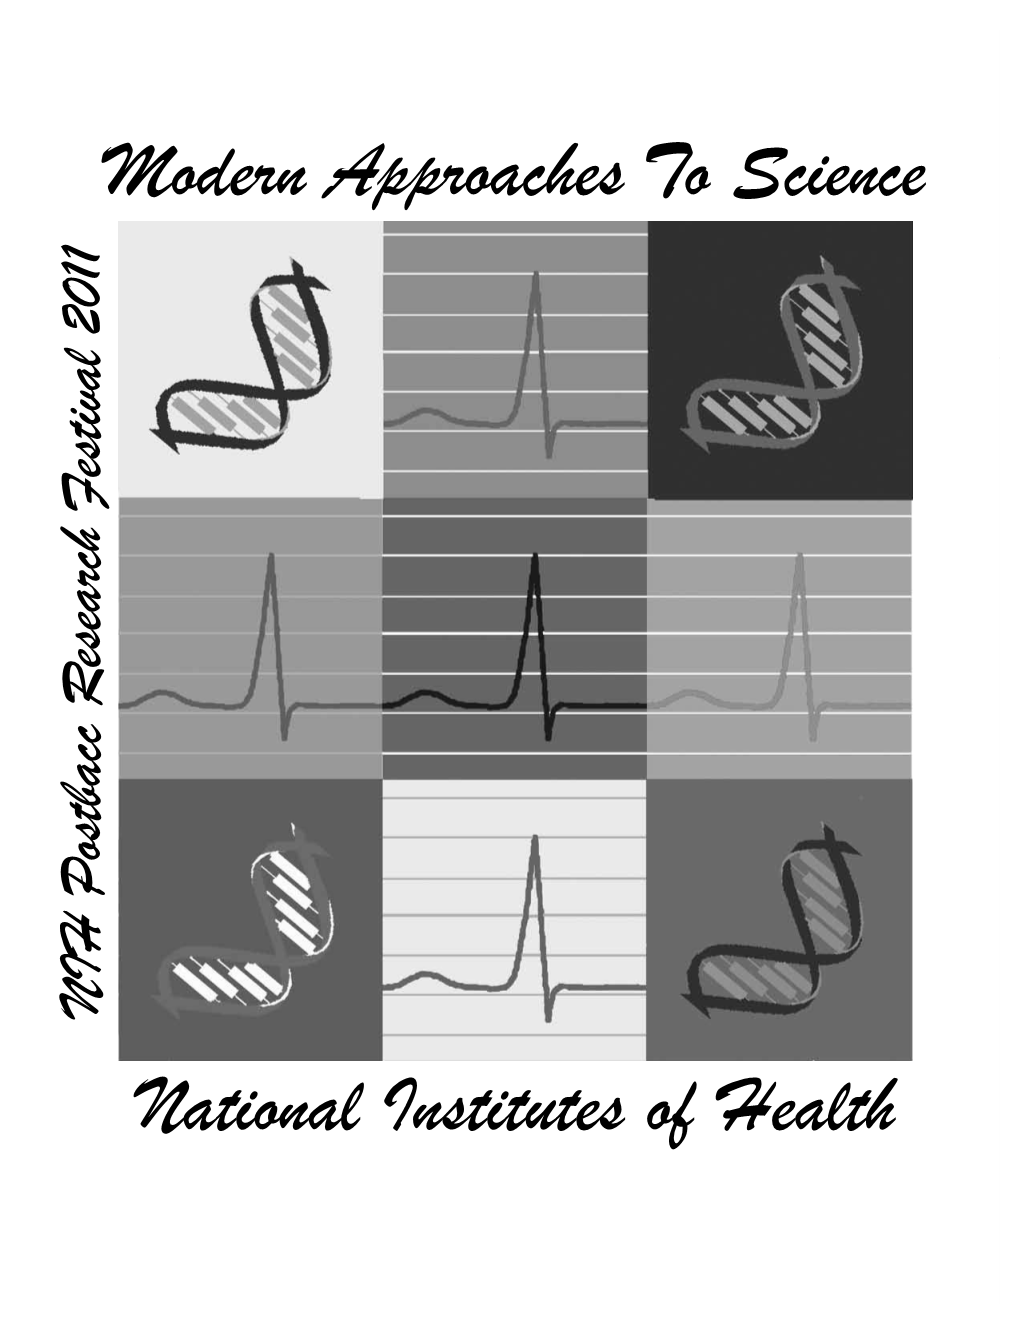 National Institutes of Health Modern Approaches to Science